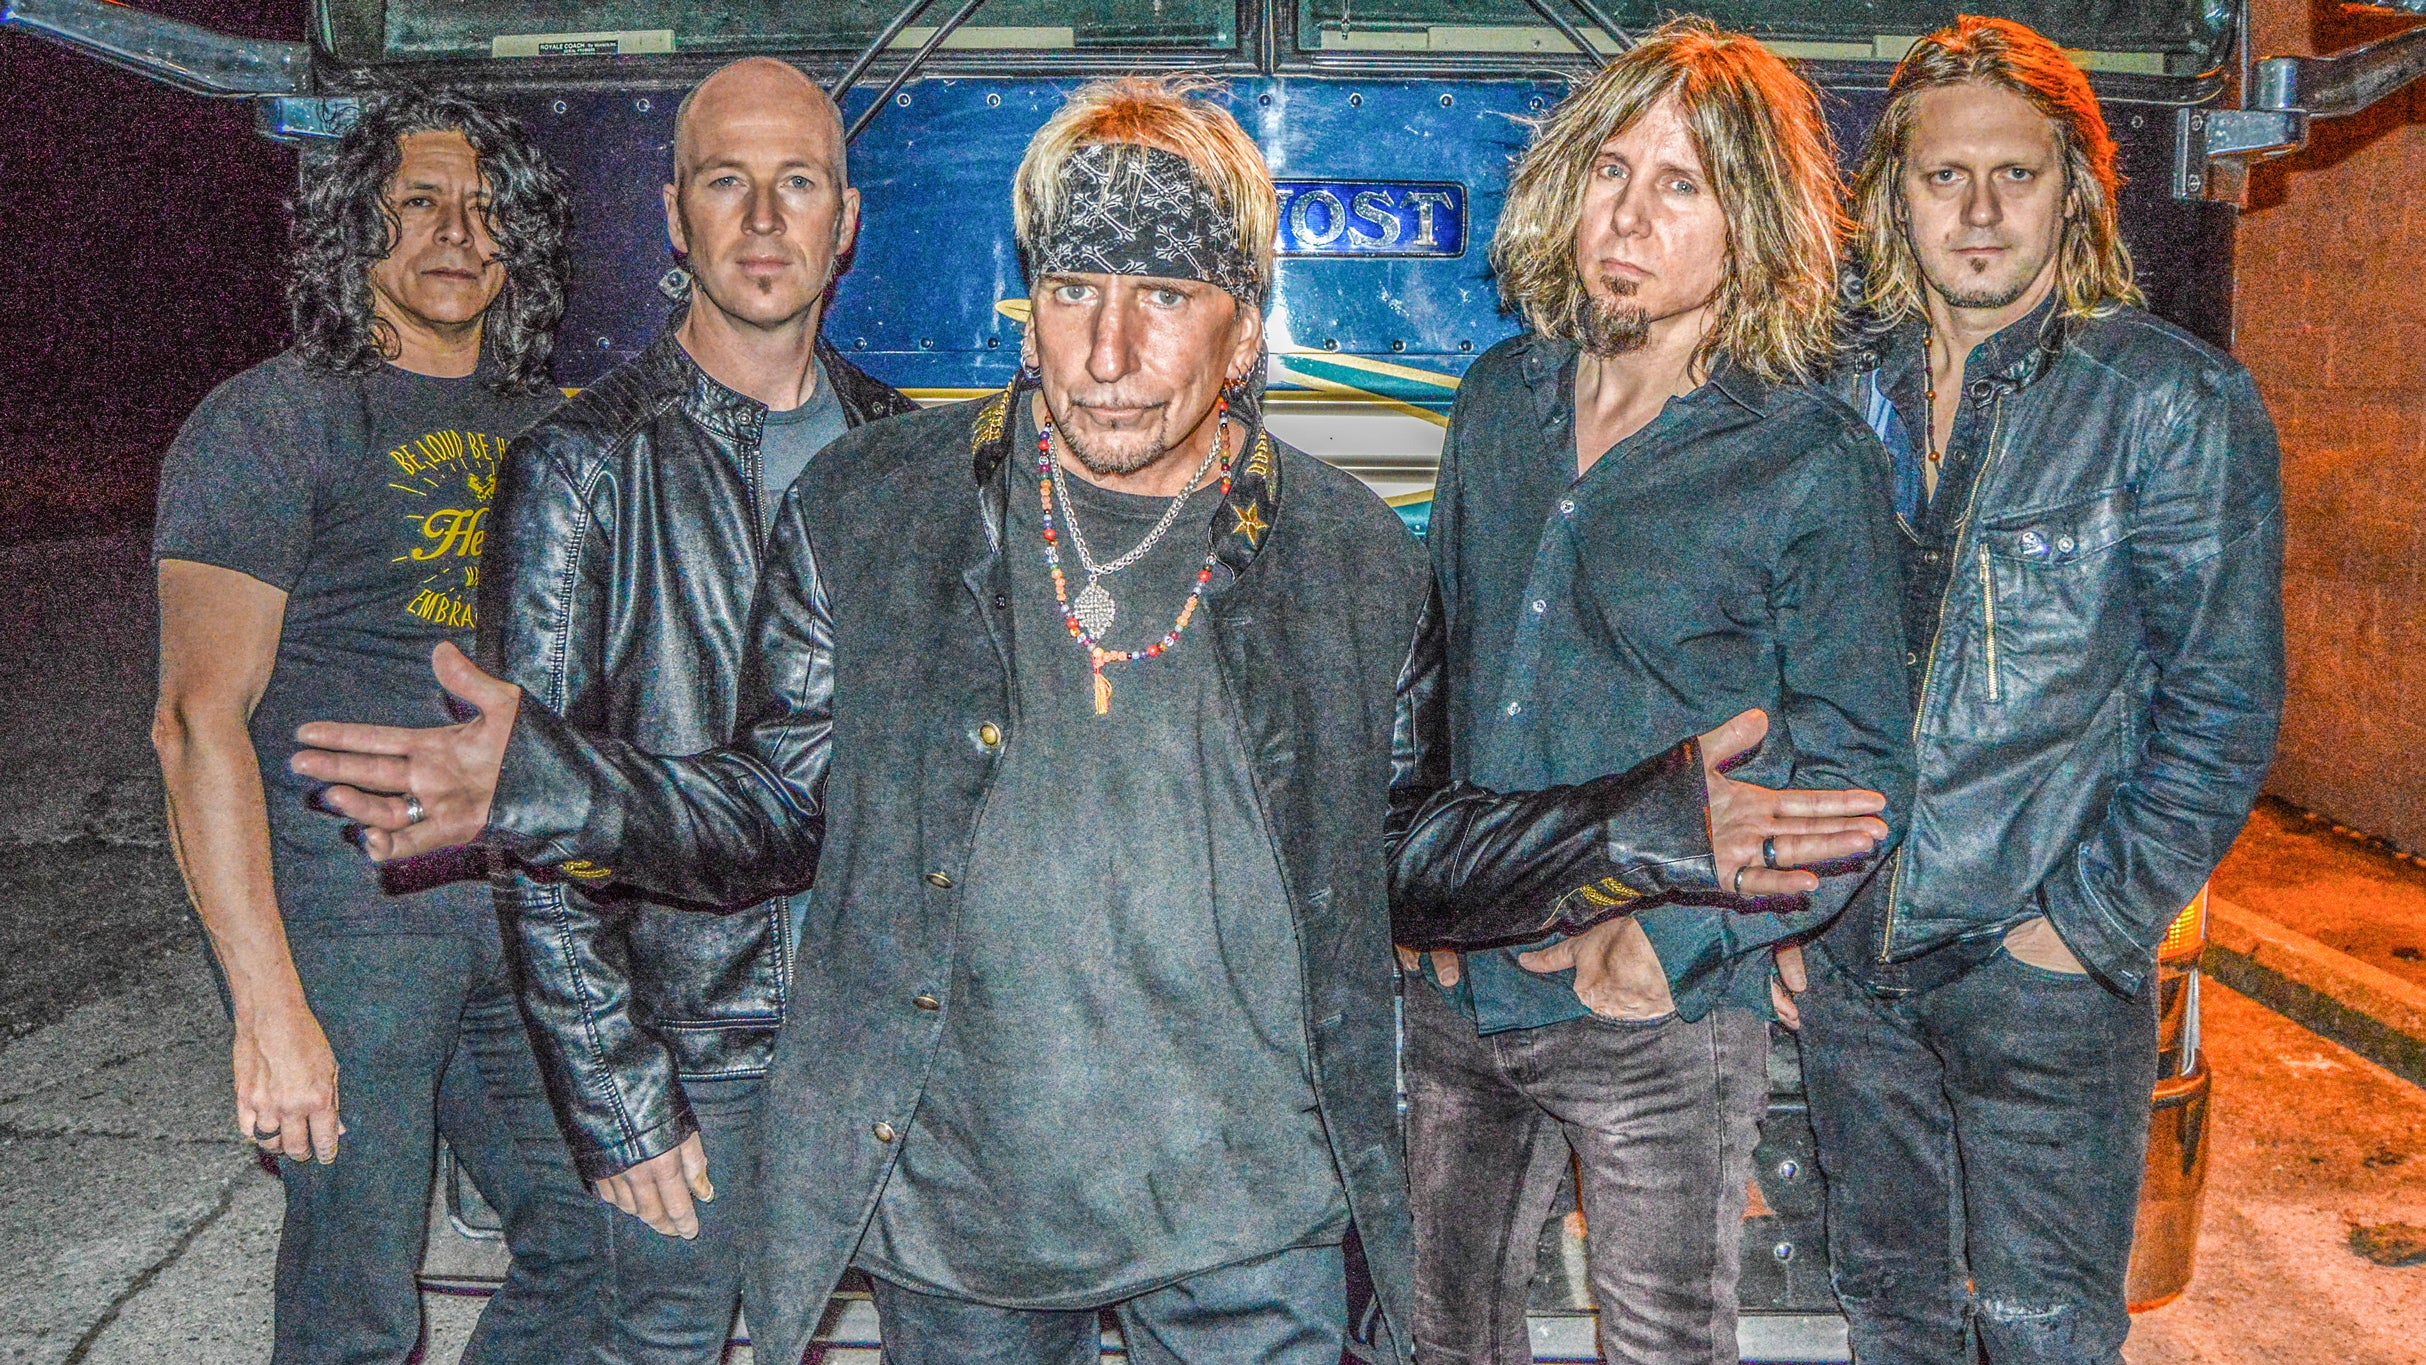 Jack Russell's Great White in Jackpot promo photo for PENN Play presale offer code